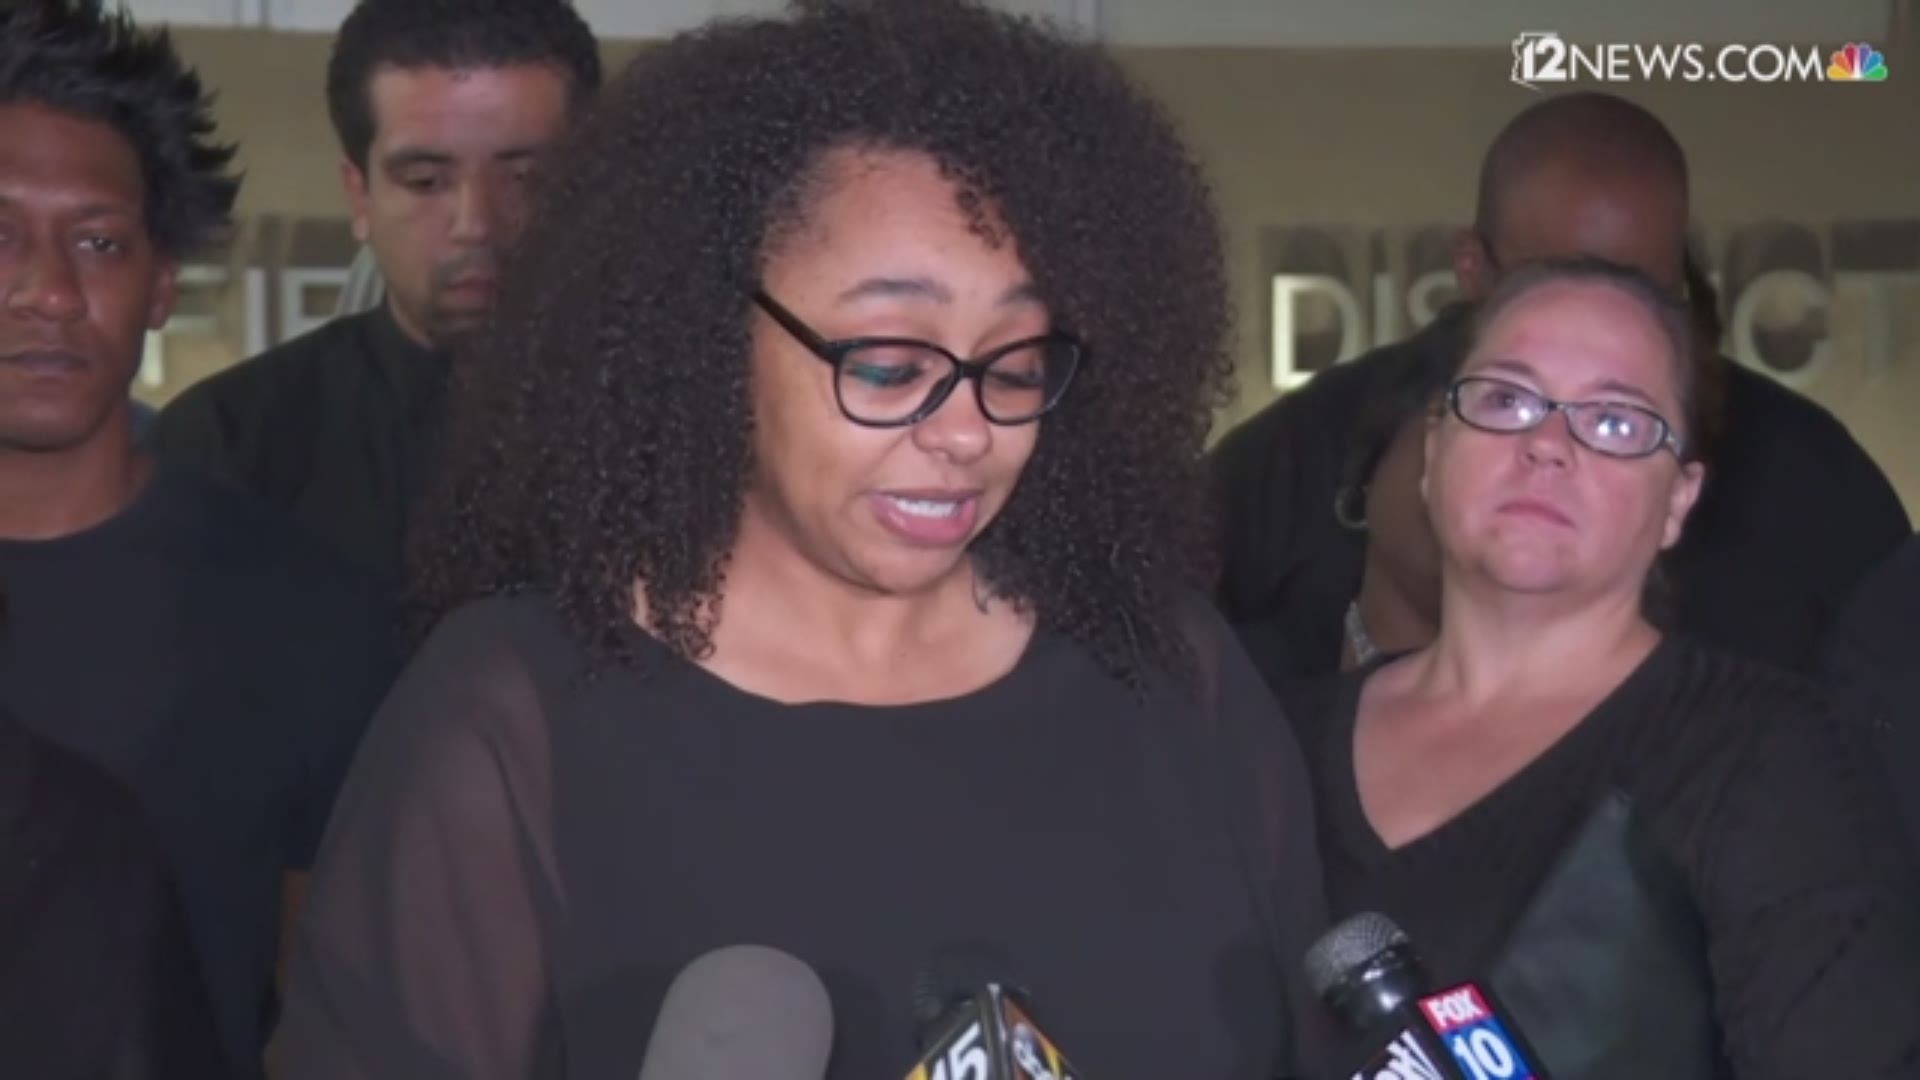 The mother of Nathaniel Thomas, accused of sexual assault in the Hamilton High School hazing case issued a statement regarding her defense attorney Ken Countryman, the case and resilience to fight for justice for her son in Chandler.